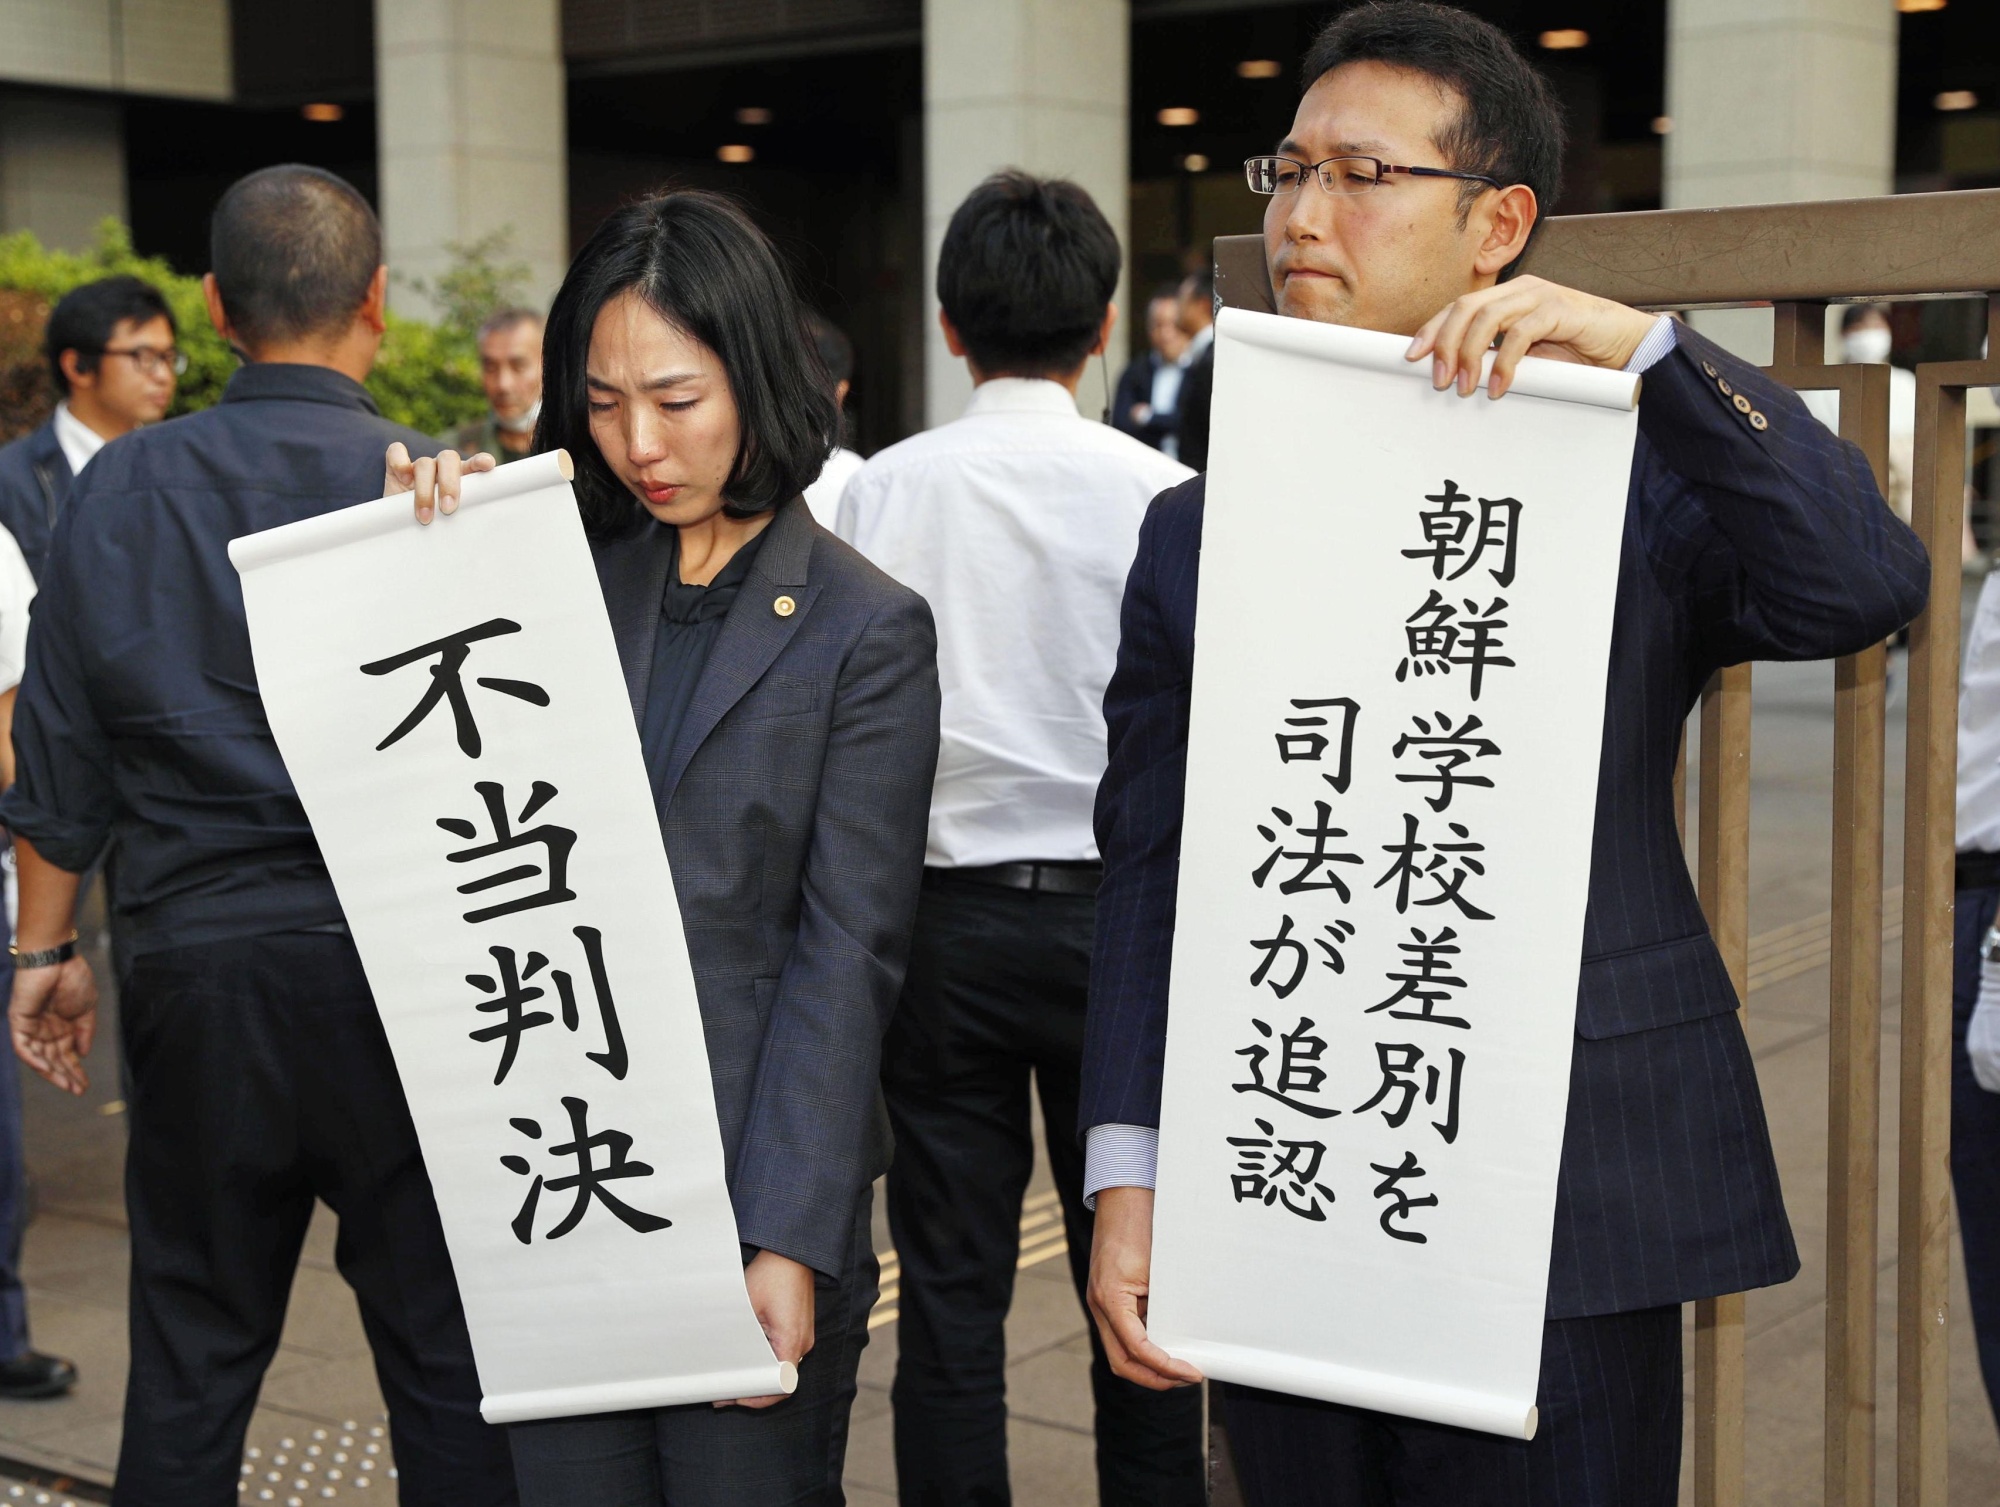 Supporters of former students from a pro-Pyongyang school involved in a lawsuit against the government over tuition waivers hold up protest signs on Tuesday in front of the Tokyo High Court. One of the signs calls a ruling denying the suit 'unreasonable.' | KYODO